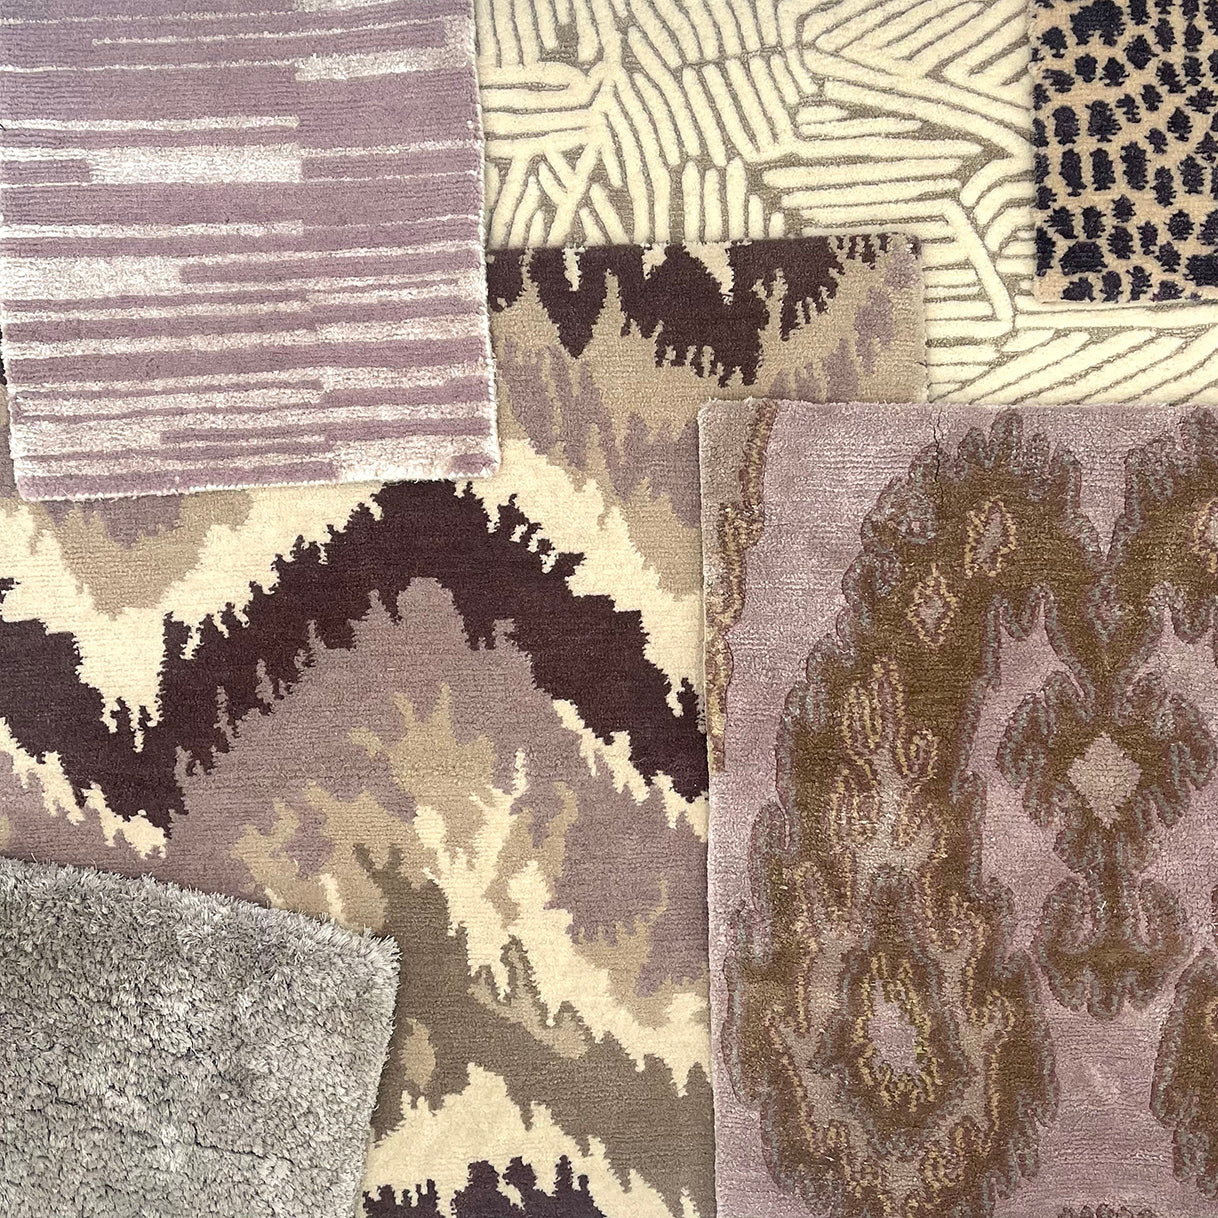 A pile of custom rug samples, in a range of patterns in a platte of light purple, taupe, brown and ream